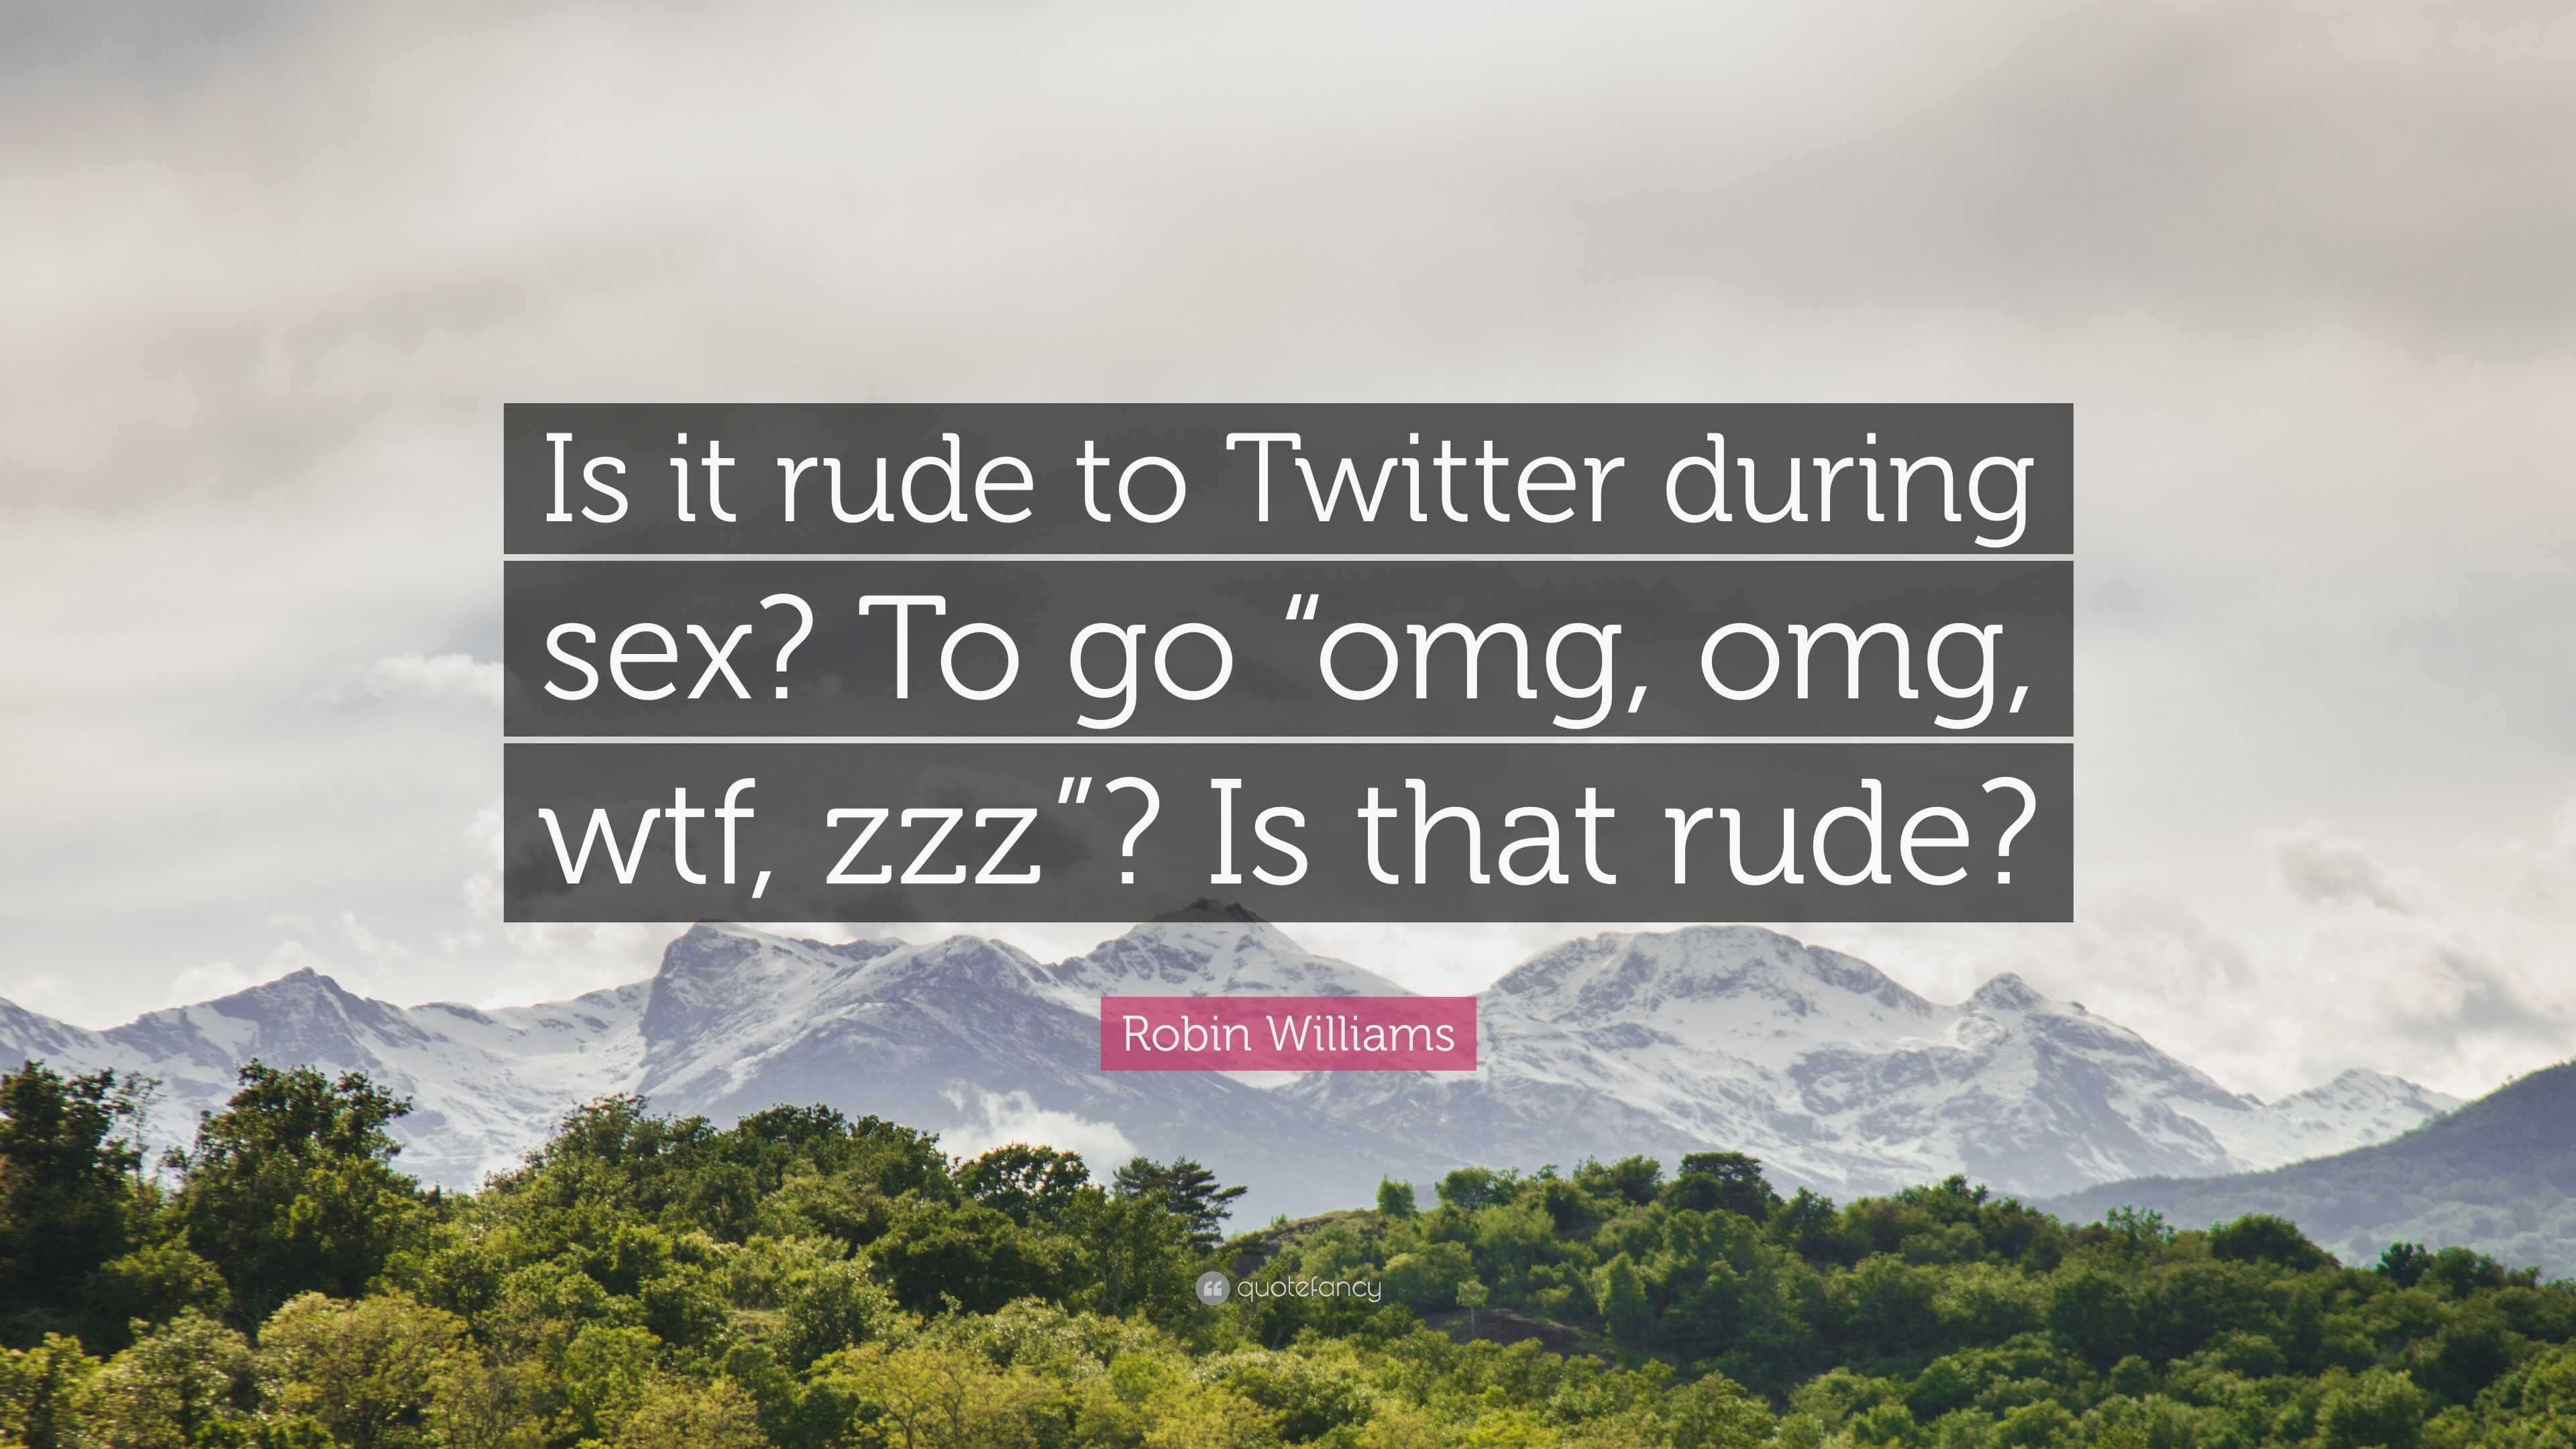 Robin Williams Quote “is It Rude To Twitter During Sex To Go “omg Omg Wtf Zzz” Is That Rude”